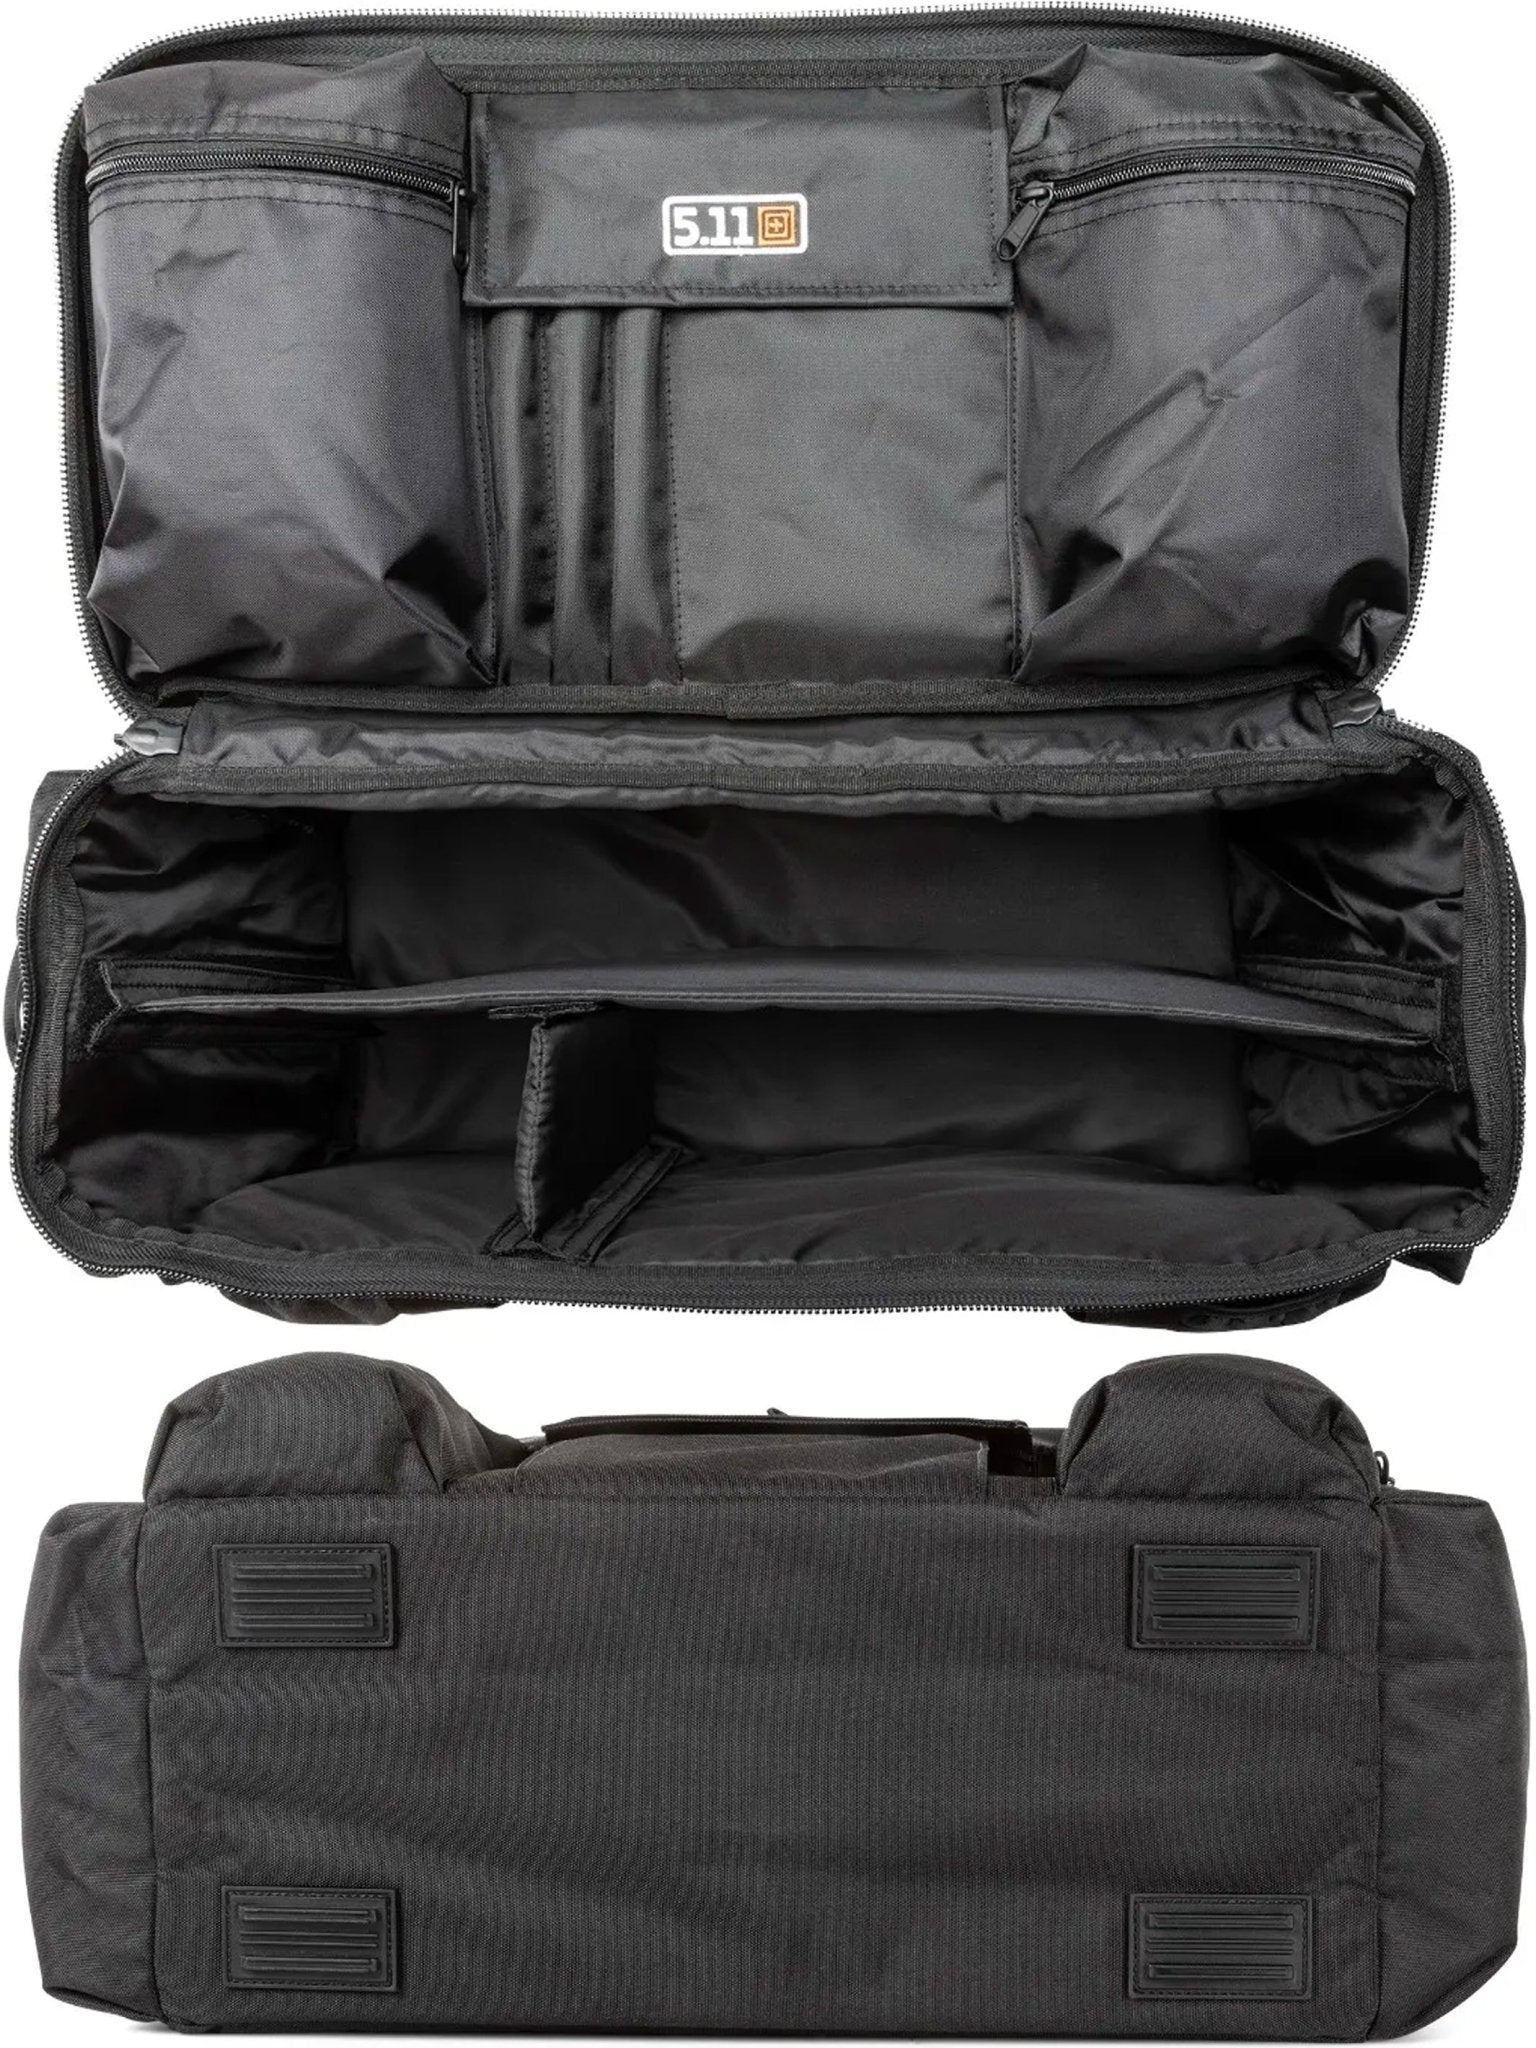 4elementsclothing5.11 Tactical5.11 Tactical - 5.11 Patrol Ready Bag (40L) 40 Litre Black 600D Polyester - Style 59012Bag59012